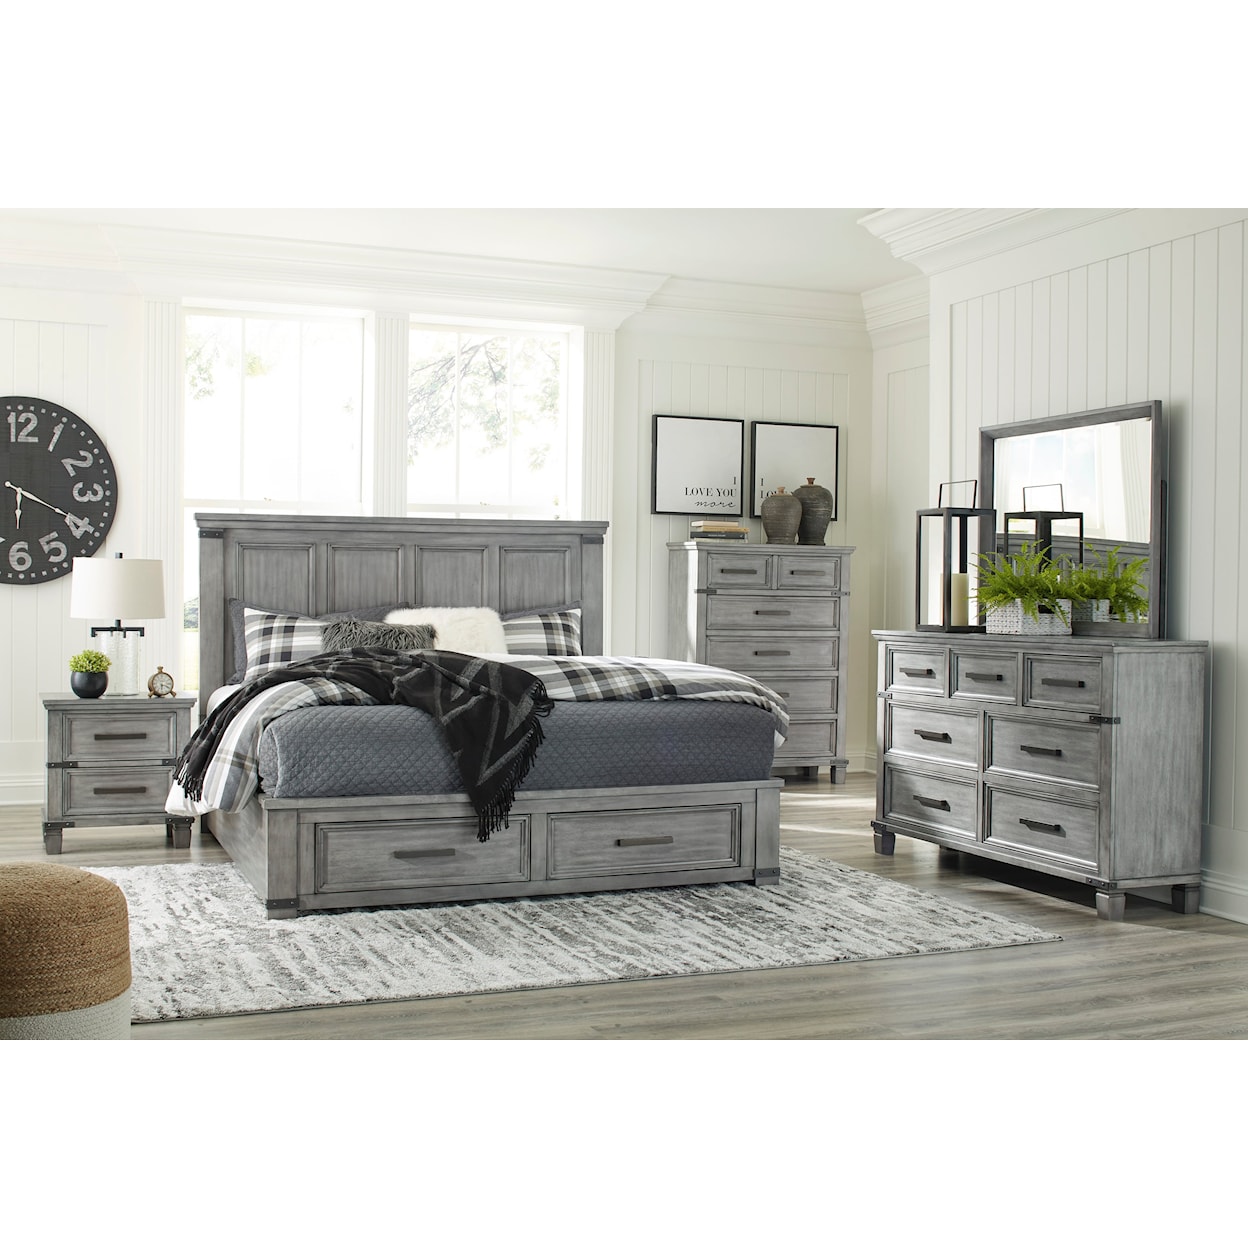 Signature Design by Ashley Russelyn Queen Bedroom Set